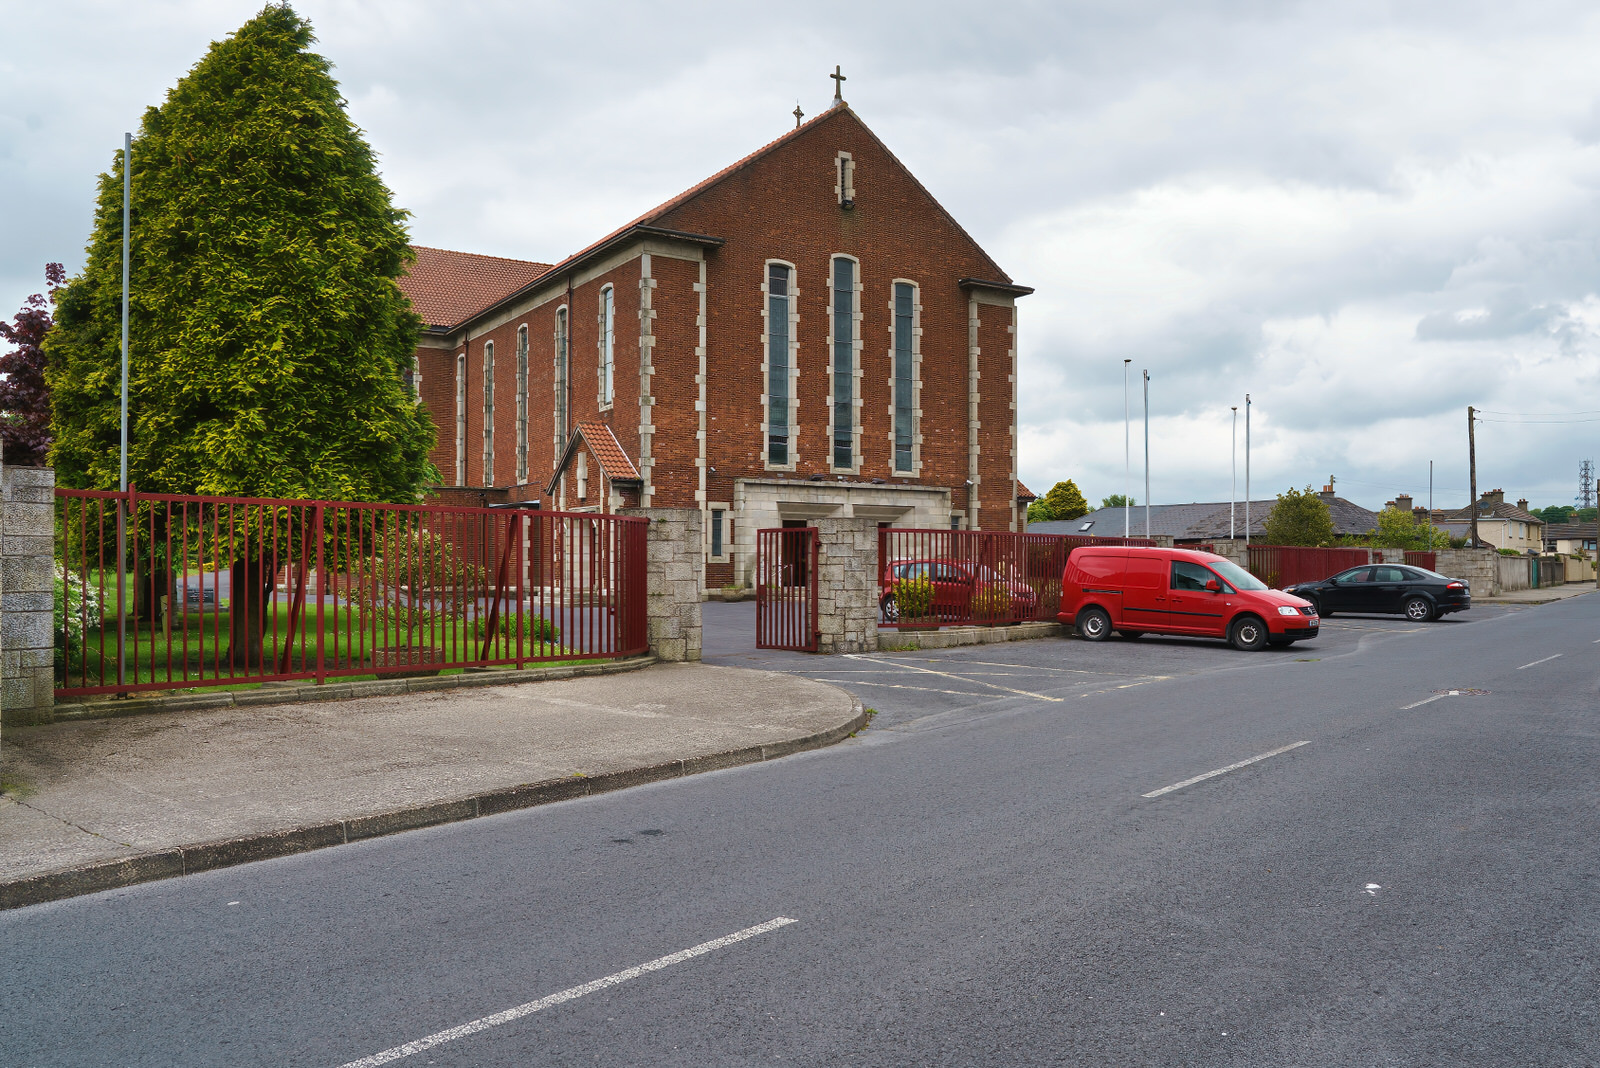 THE HOLY FAMILY PARISH CHURCH IN WATERFORD